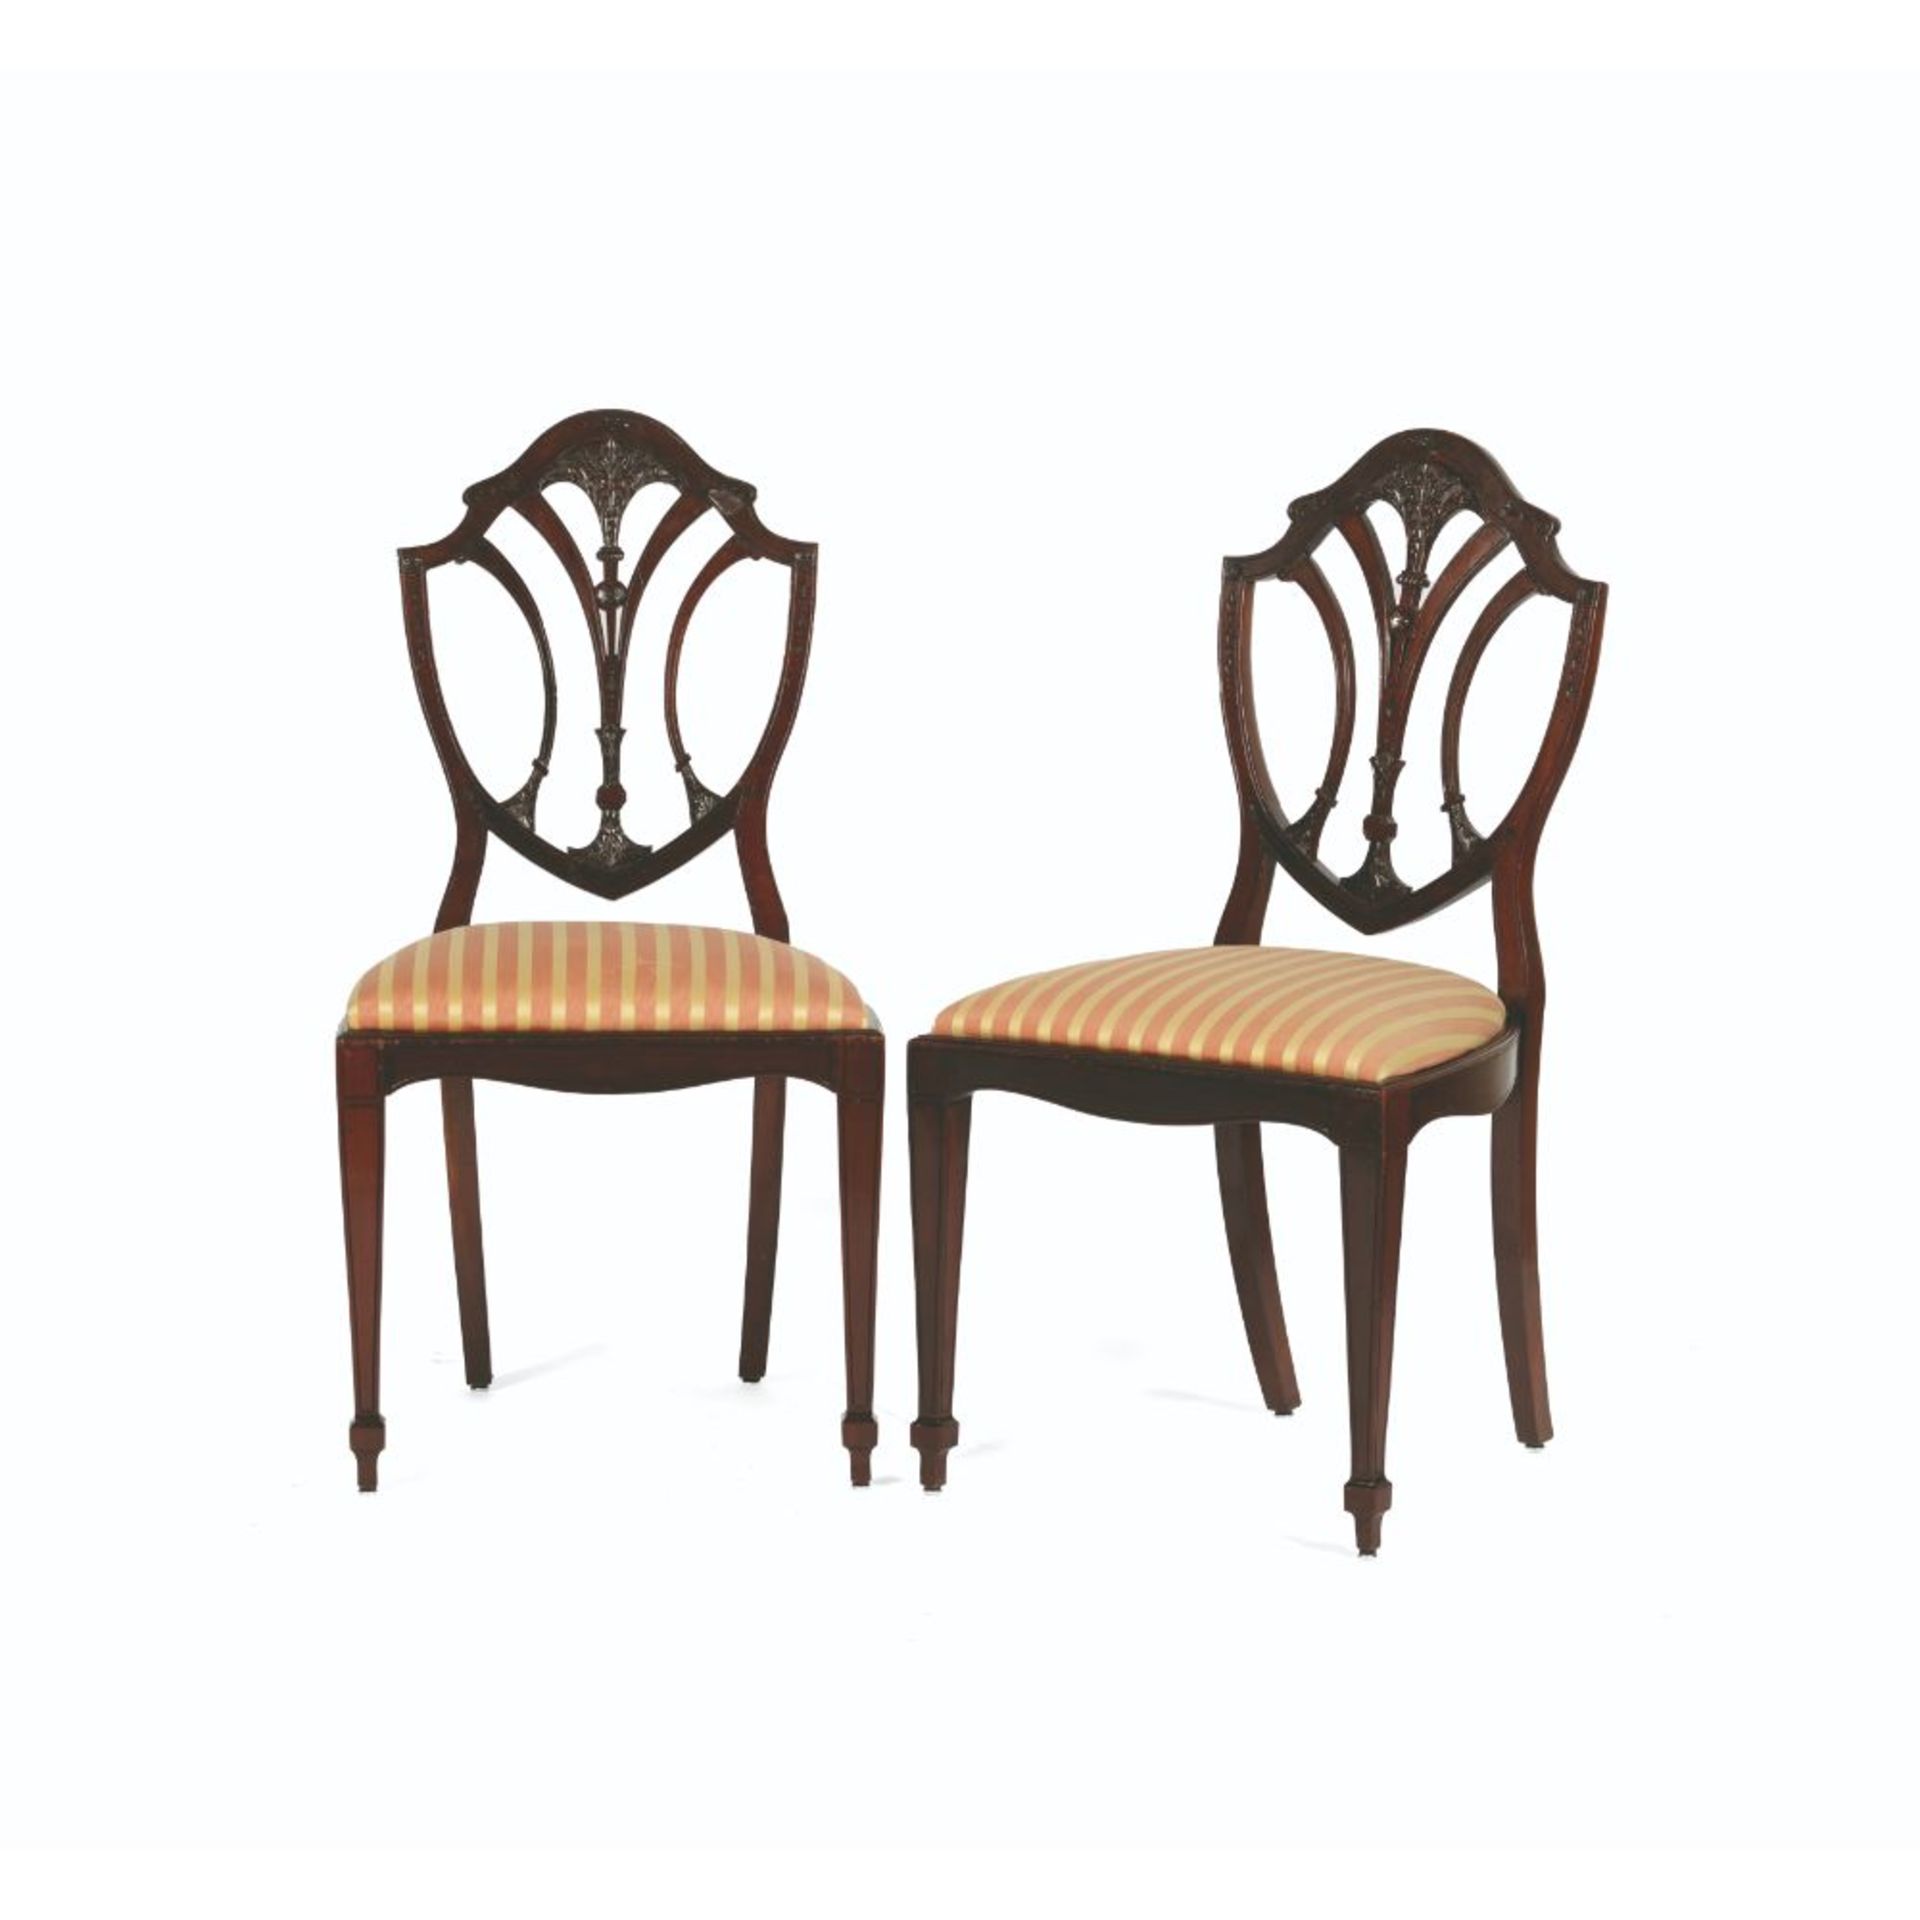 A set of four Hepplewhite style chairs, Mahogany, Pierced and carved splats, Textile upholstered - Image 2 of 2